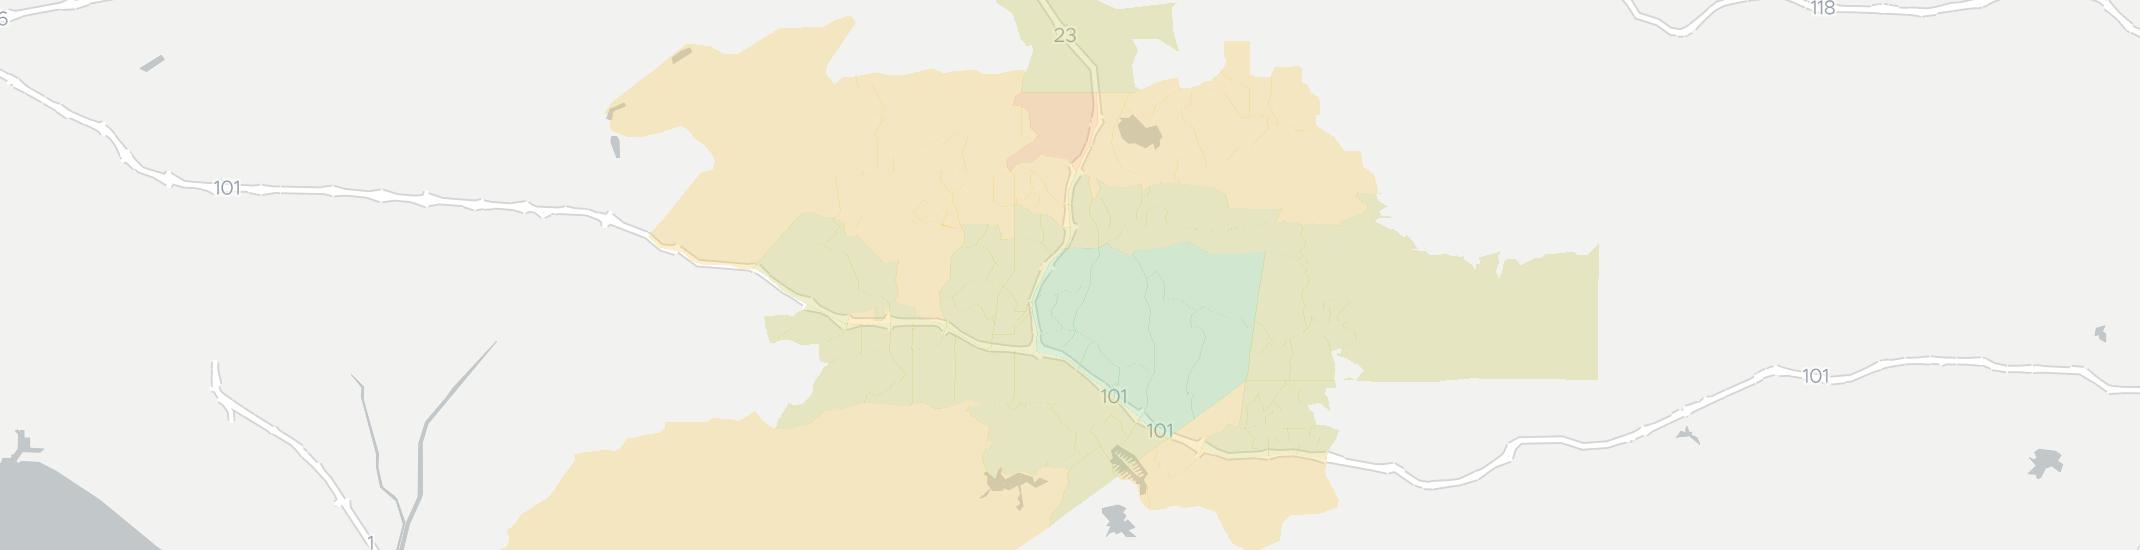 Thousand Oaks Internet Competition Map. Click for interactive map